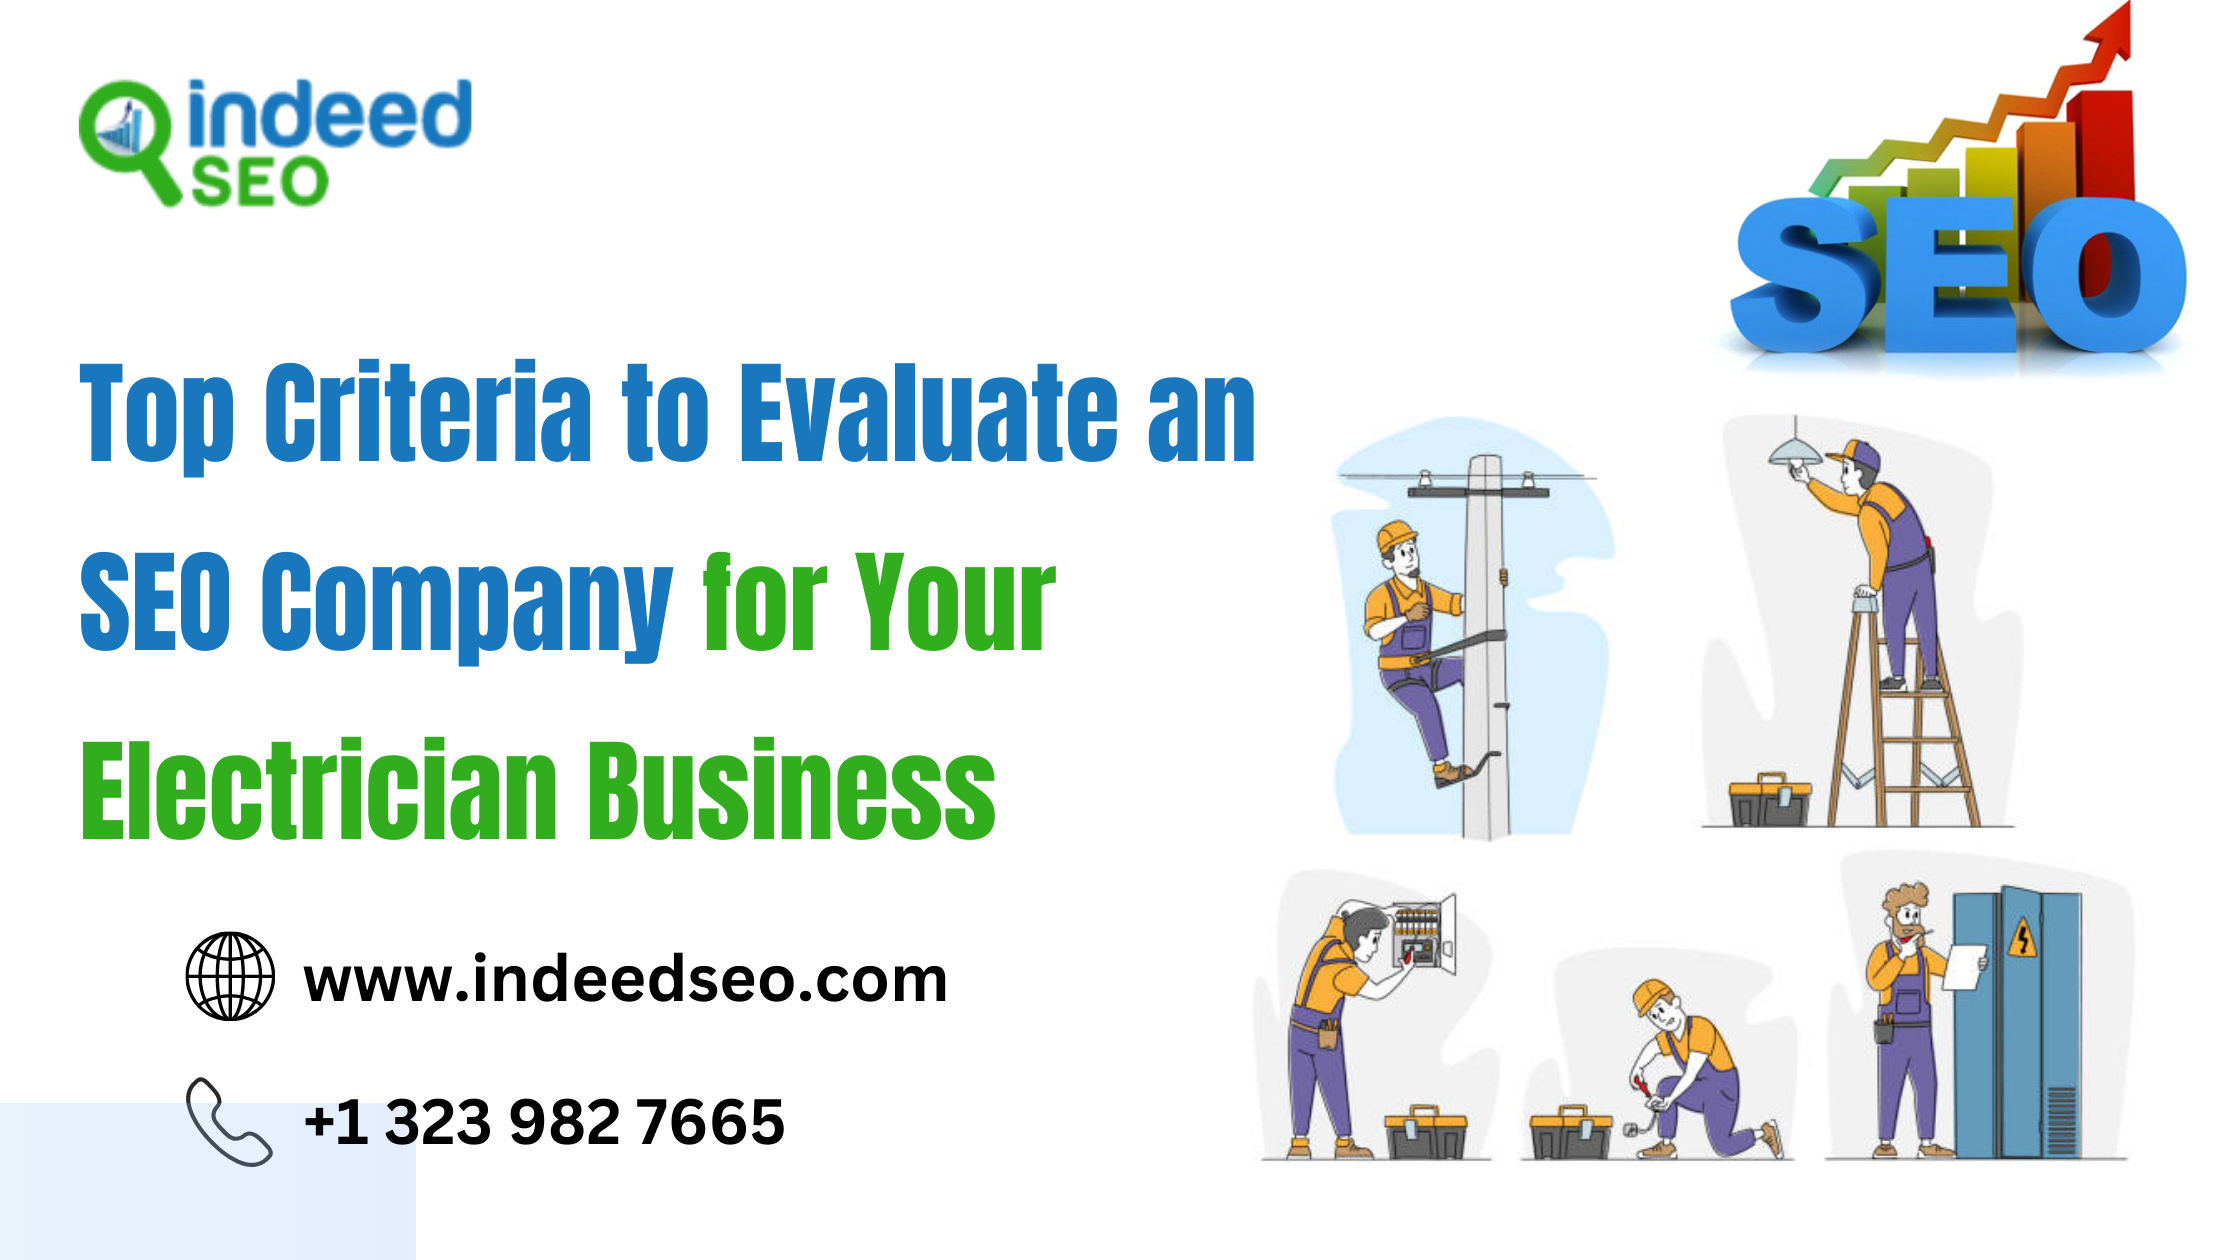 Evaluate an SEO Company for Your Electrician Business